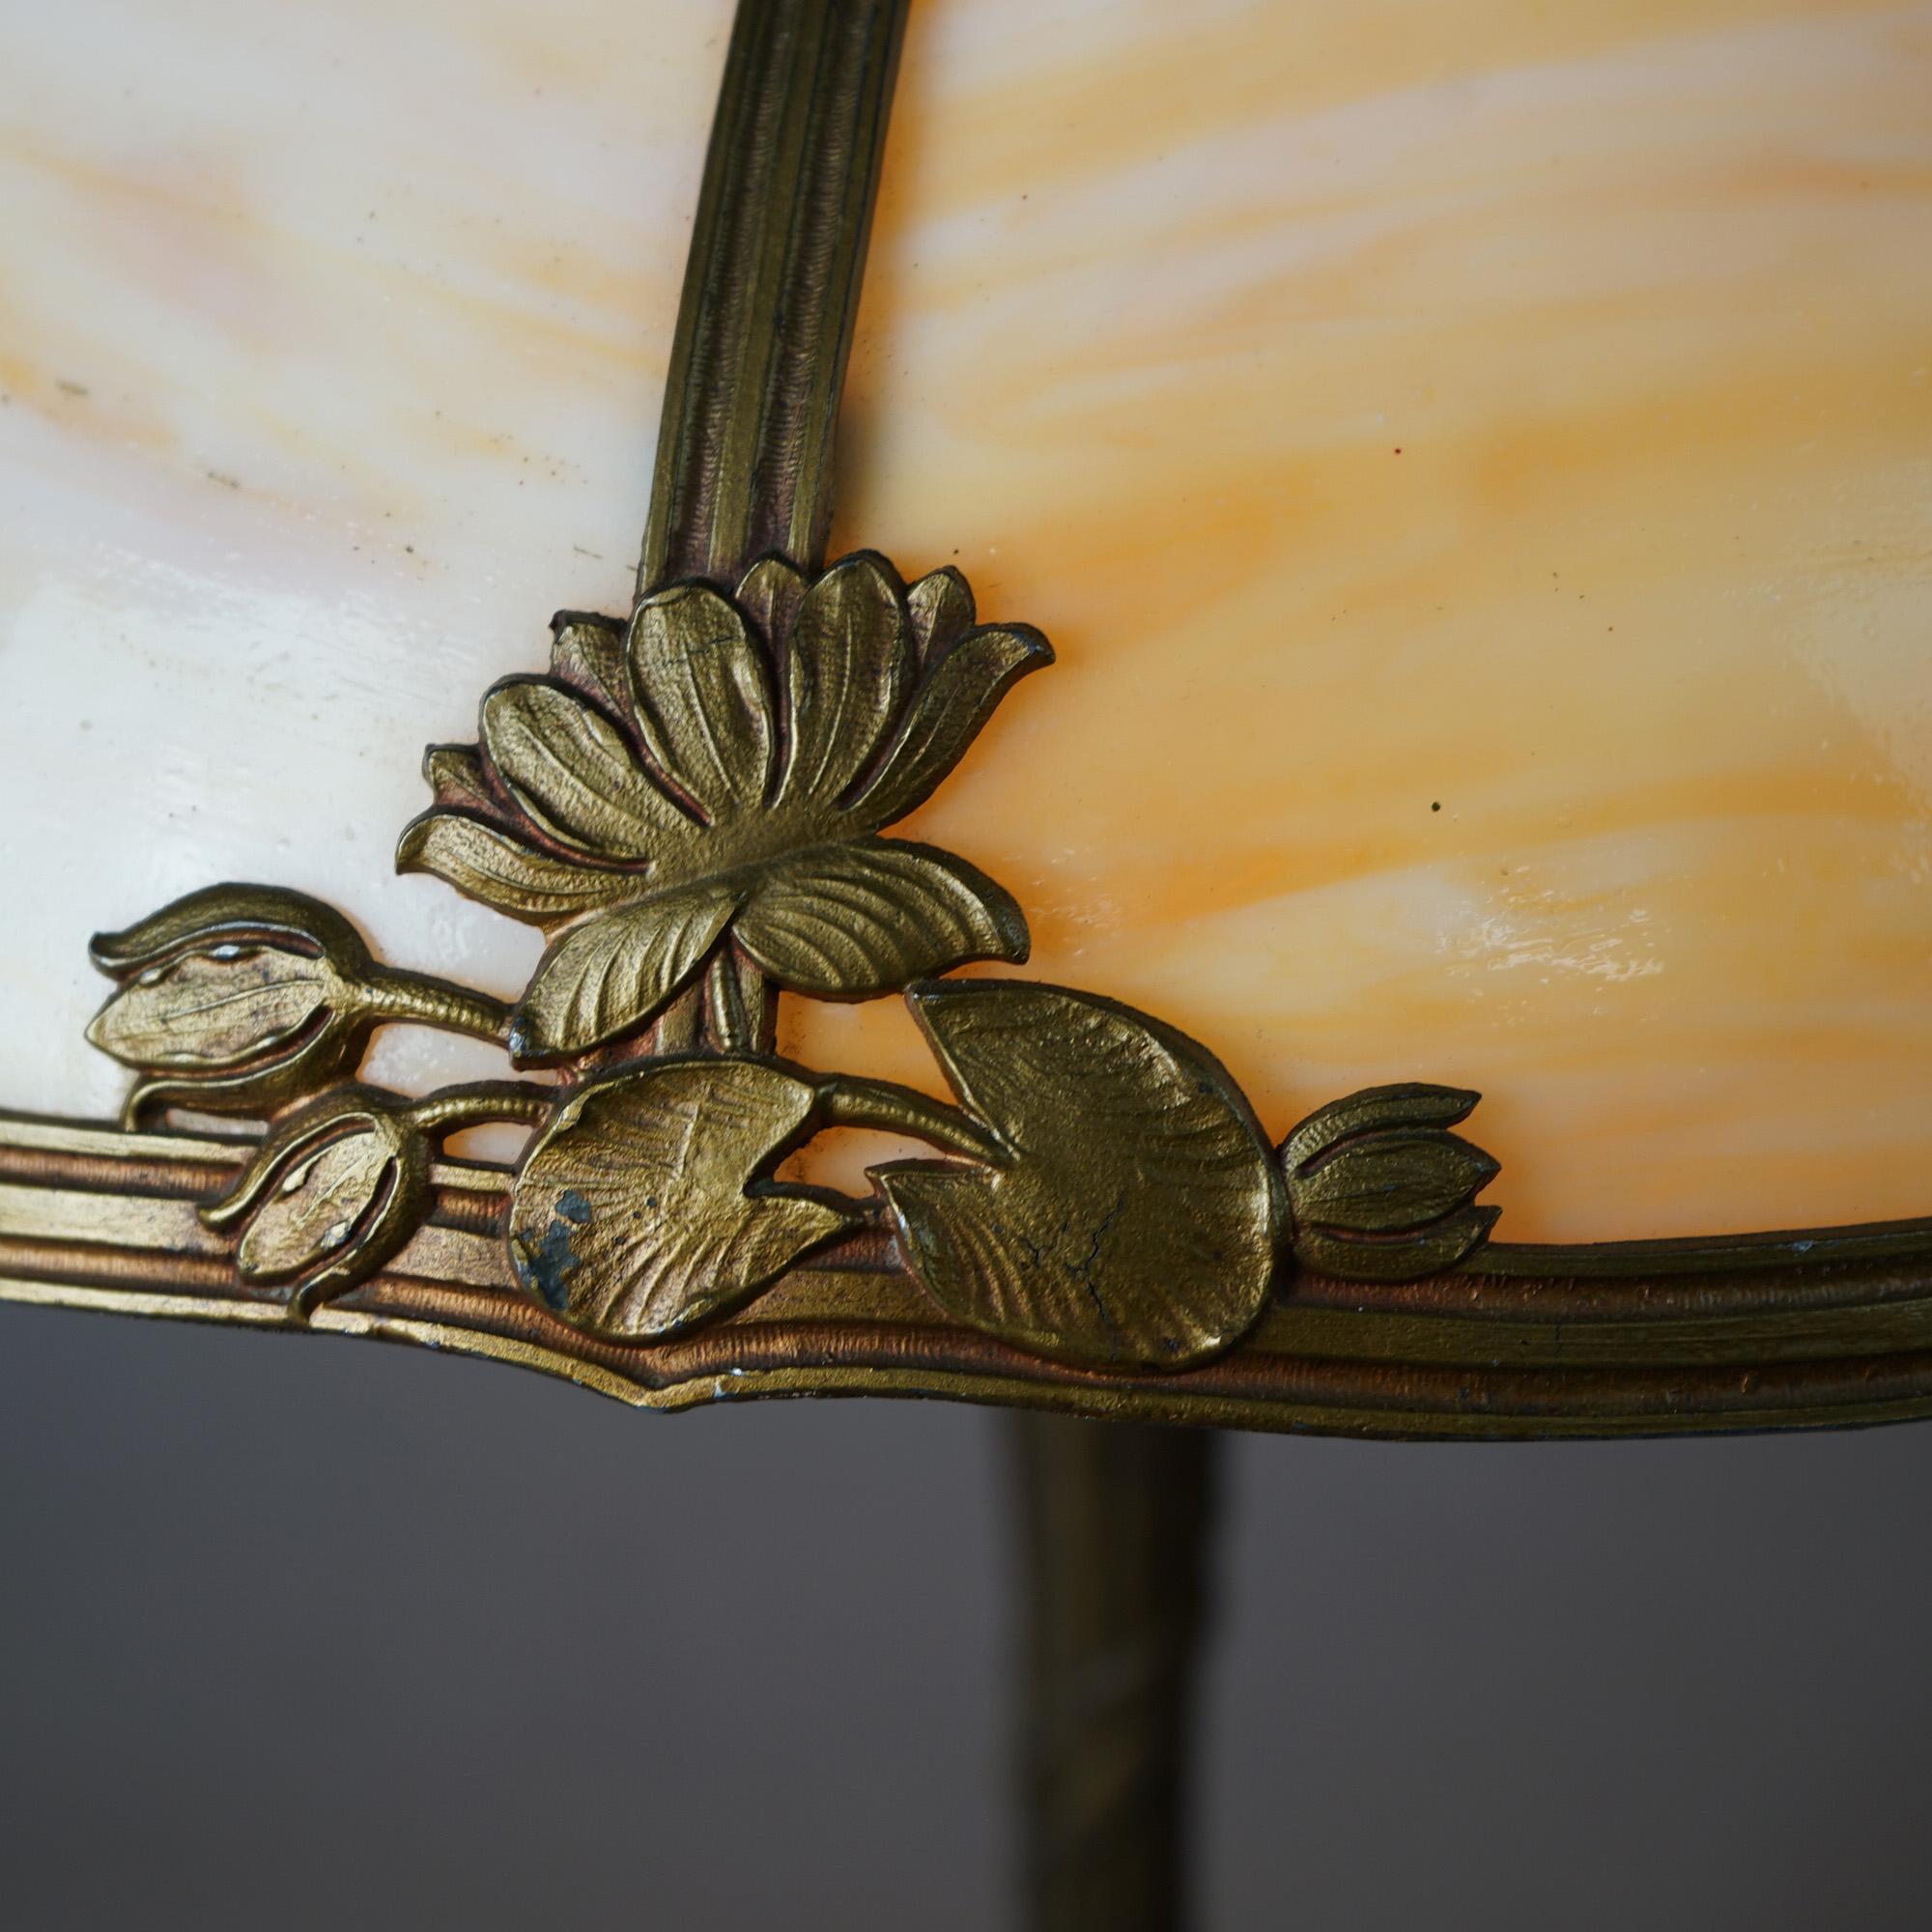 An antique Arts and Crafts table lamp in the manner of Bradley & Hubbard offers dome form shade with cast frame having lotus flower (or water lily) elements and housing bent slag glass panels over single socket base, c1920

Mesures - 21,5 